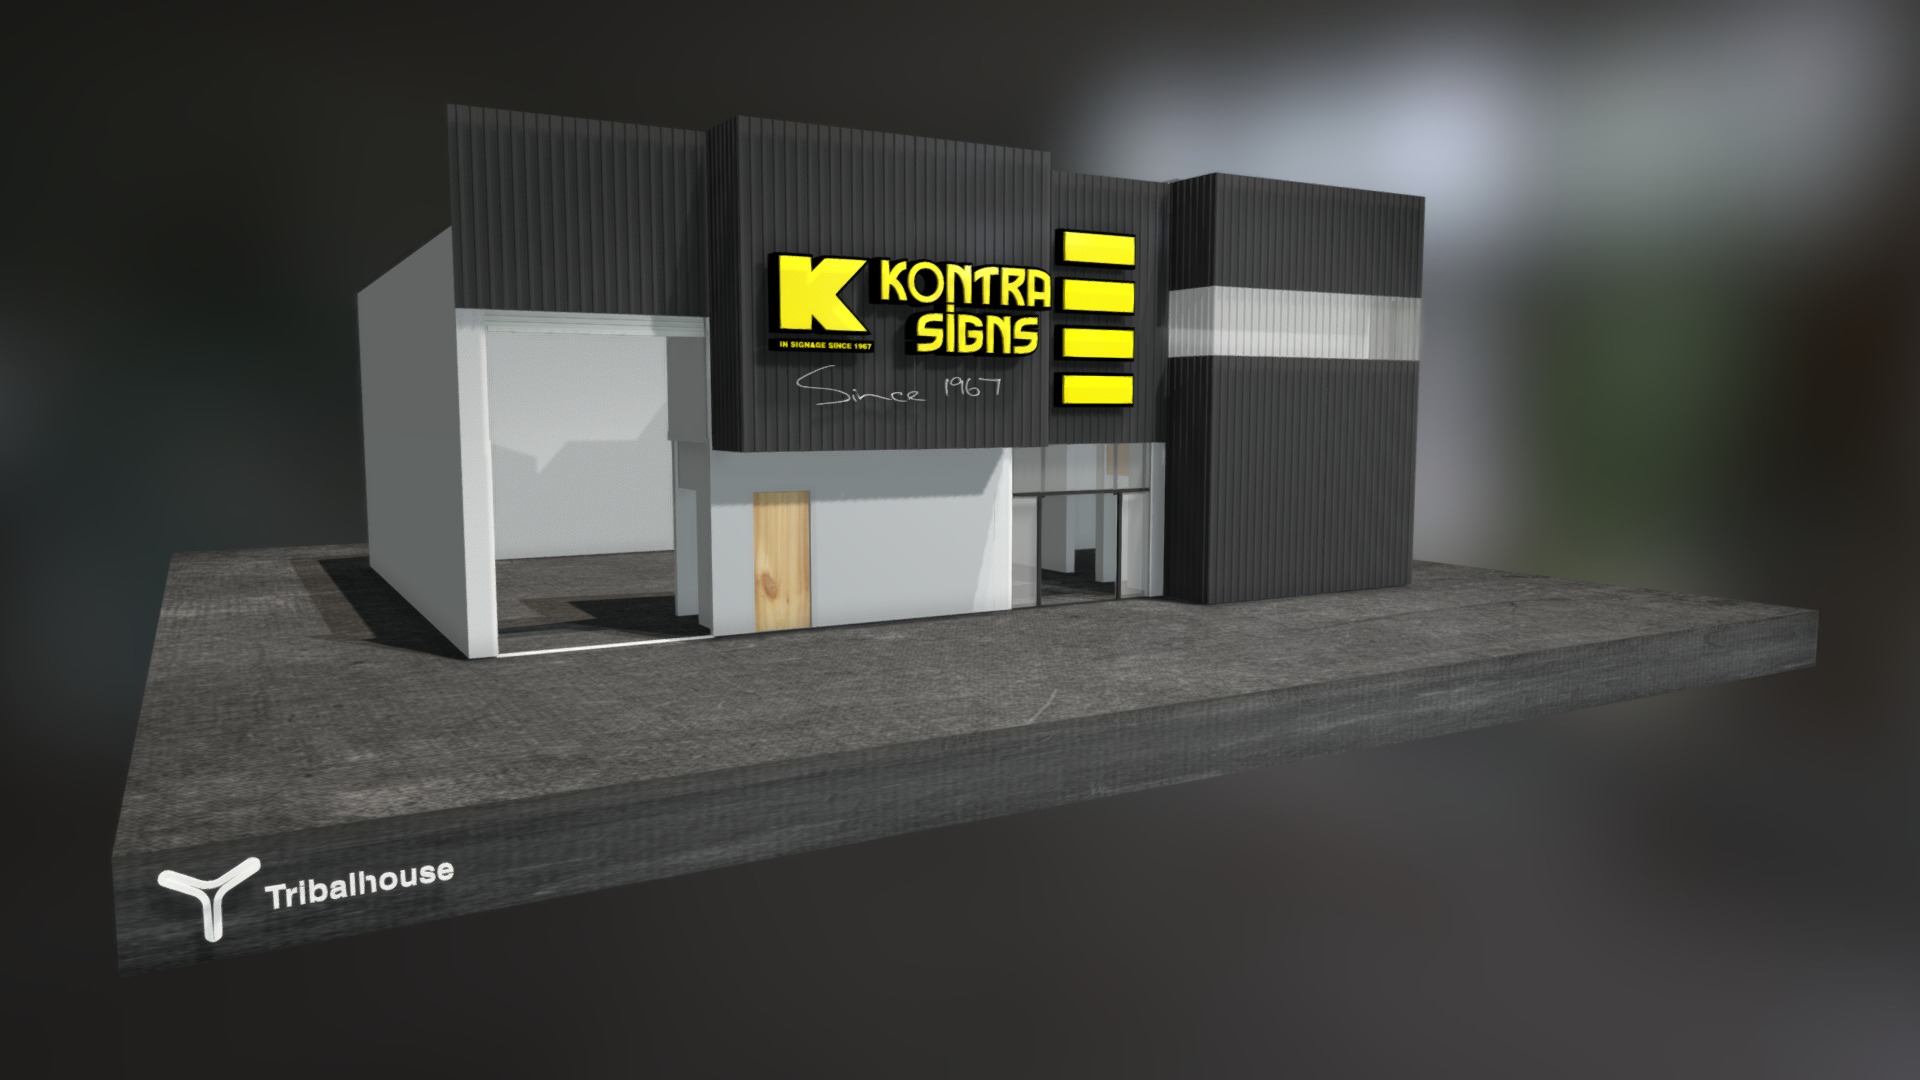 Kontra Signs | Building/Brand Evolution


KEYS/NAVIGATION:

LeftMouseClick to VIEW

Shift &amp; LeftMouseClick to PAN

CTRL &amp; LeftMouseClick to ZOOM 
OR MiddleMouseScroll

Click on area to focus camera - Kontra Signs | Building/Brand Evolution - 3D model by Tribalhouse 3D (@adrianapple71) 3d model